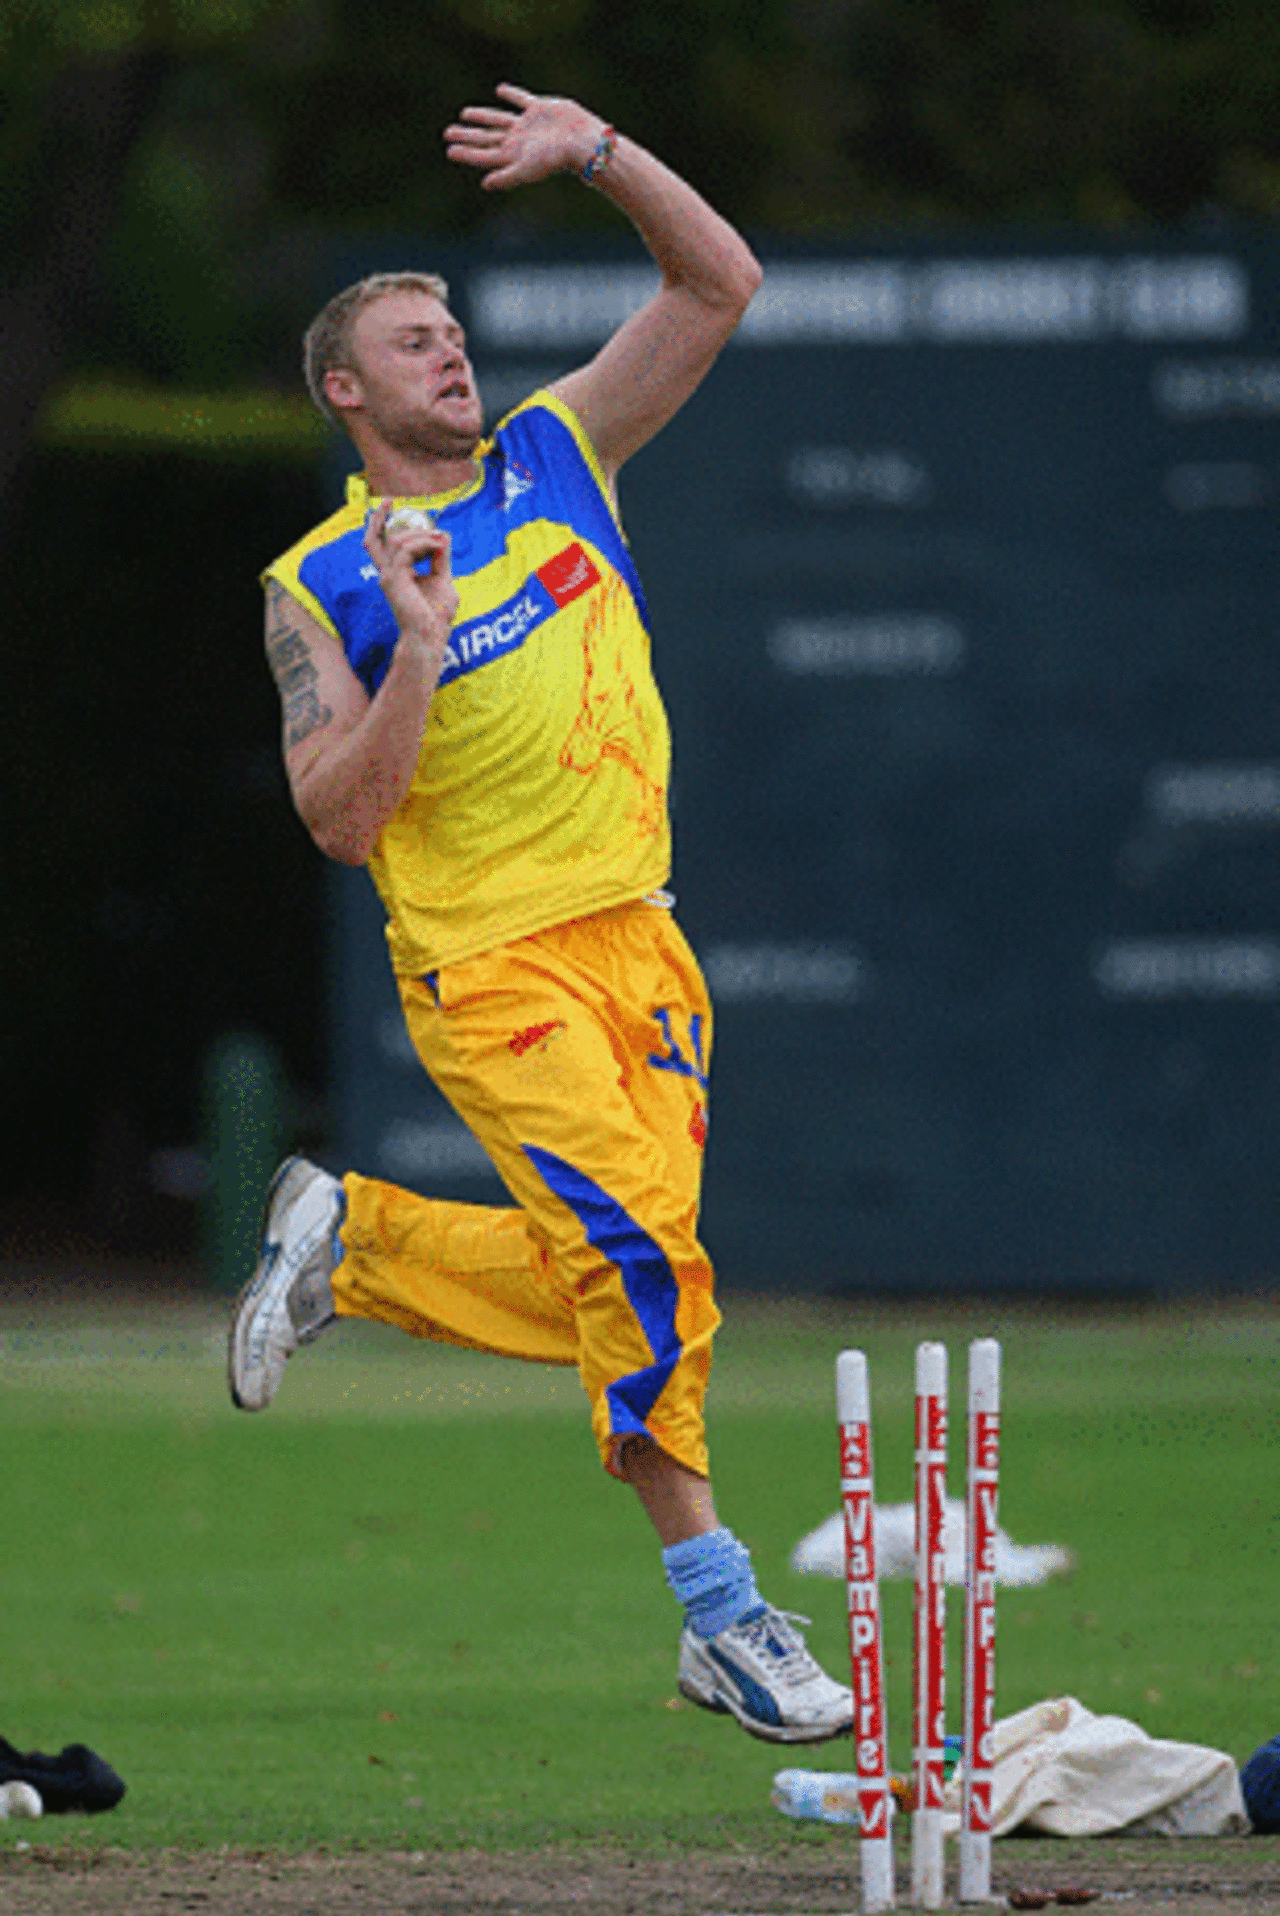 Andrew Flintoff prepares to send one down, Cape Town, April 16, 2009